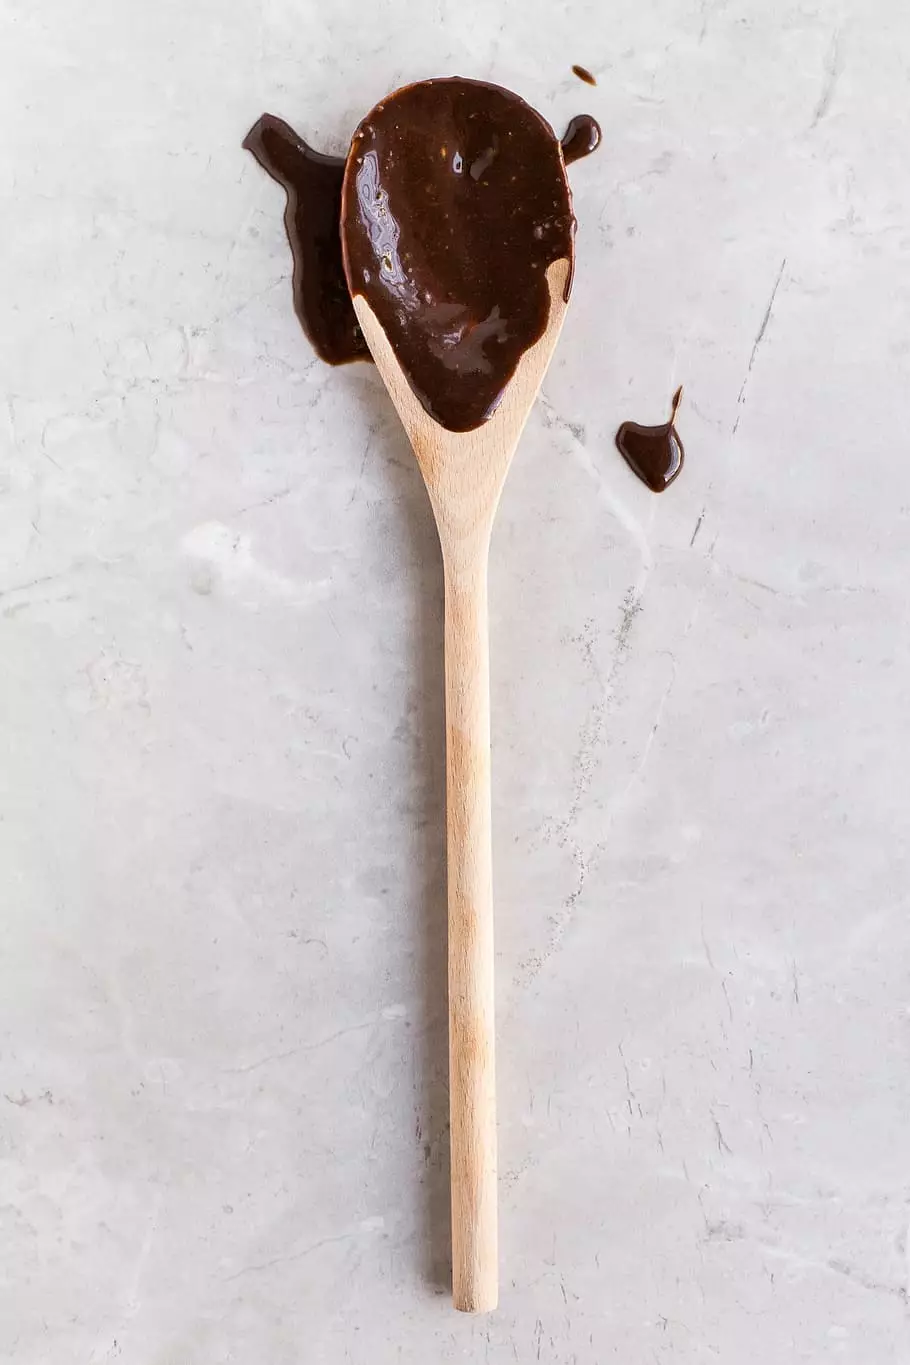 We're not sure we'll be able to enjoy using a wooden spoon ever again (